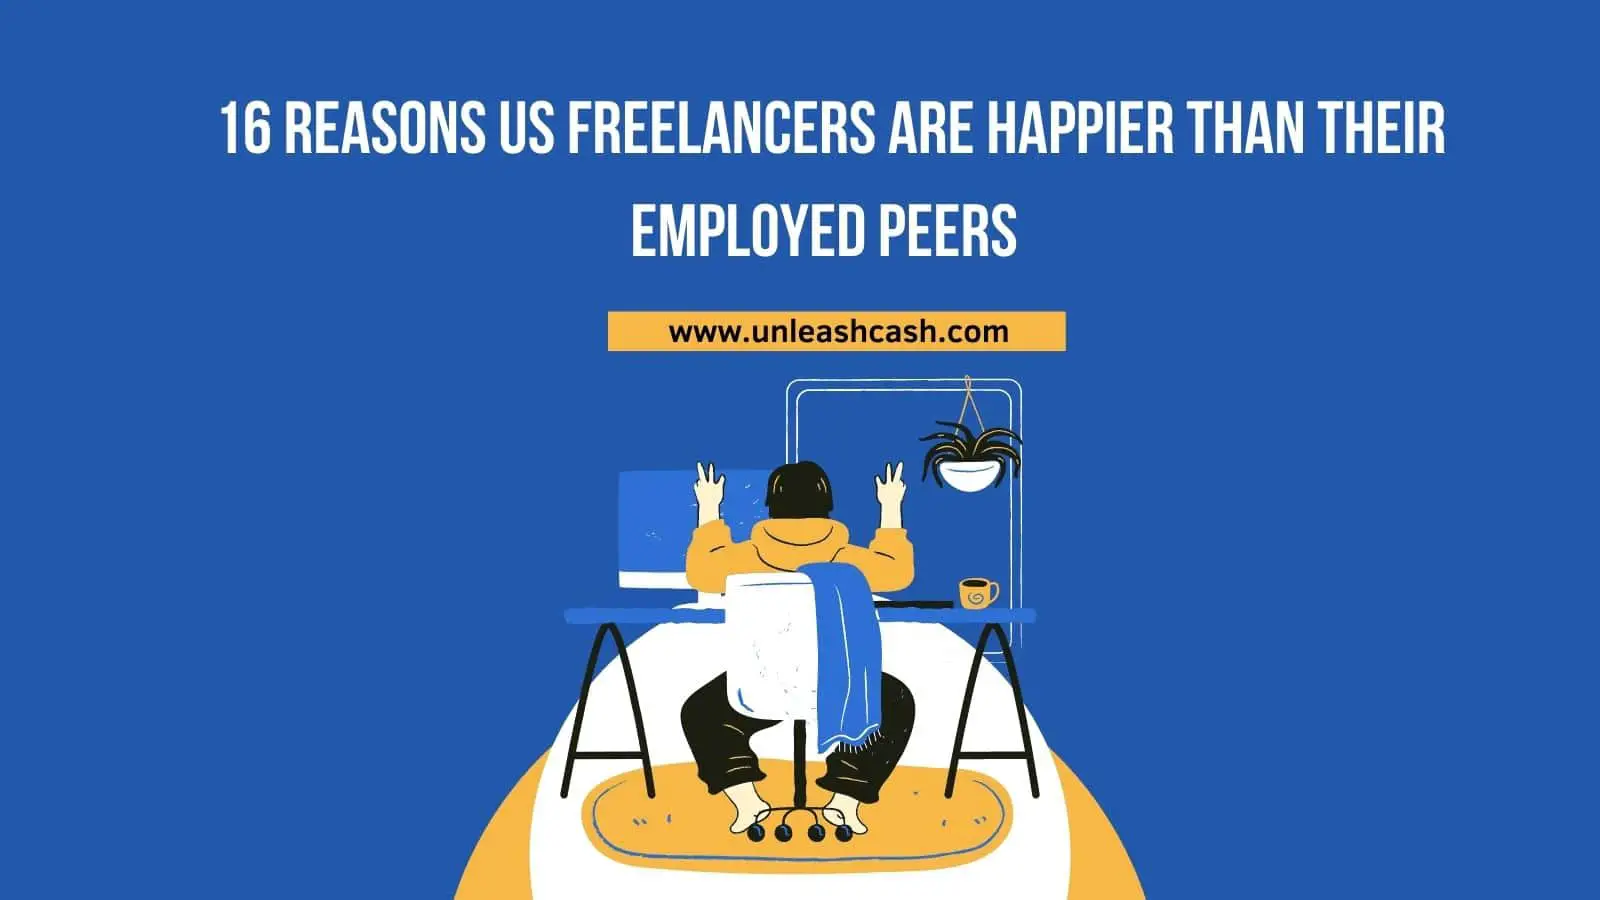 16 Reasons US Freelancers Are Happier Than Their Employed Peers